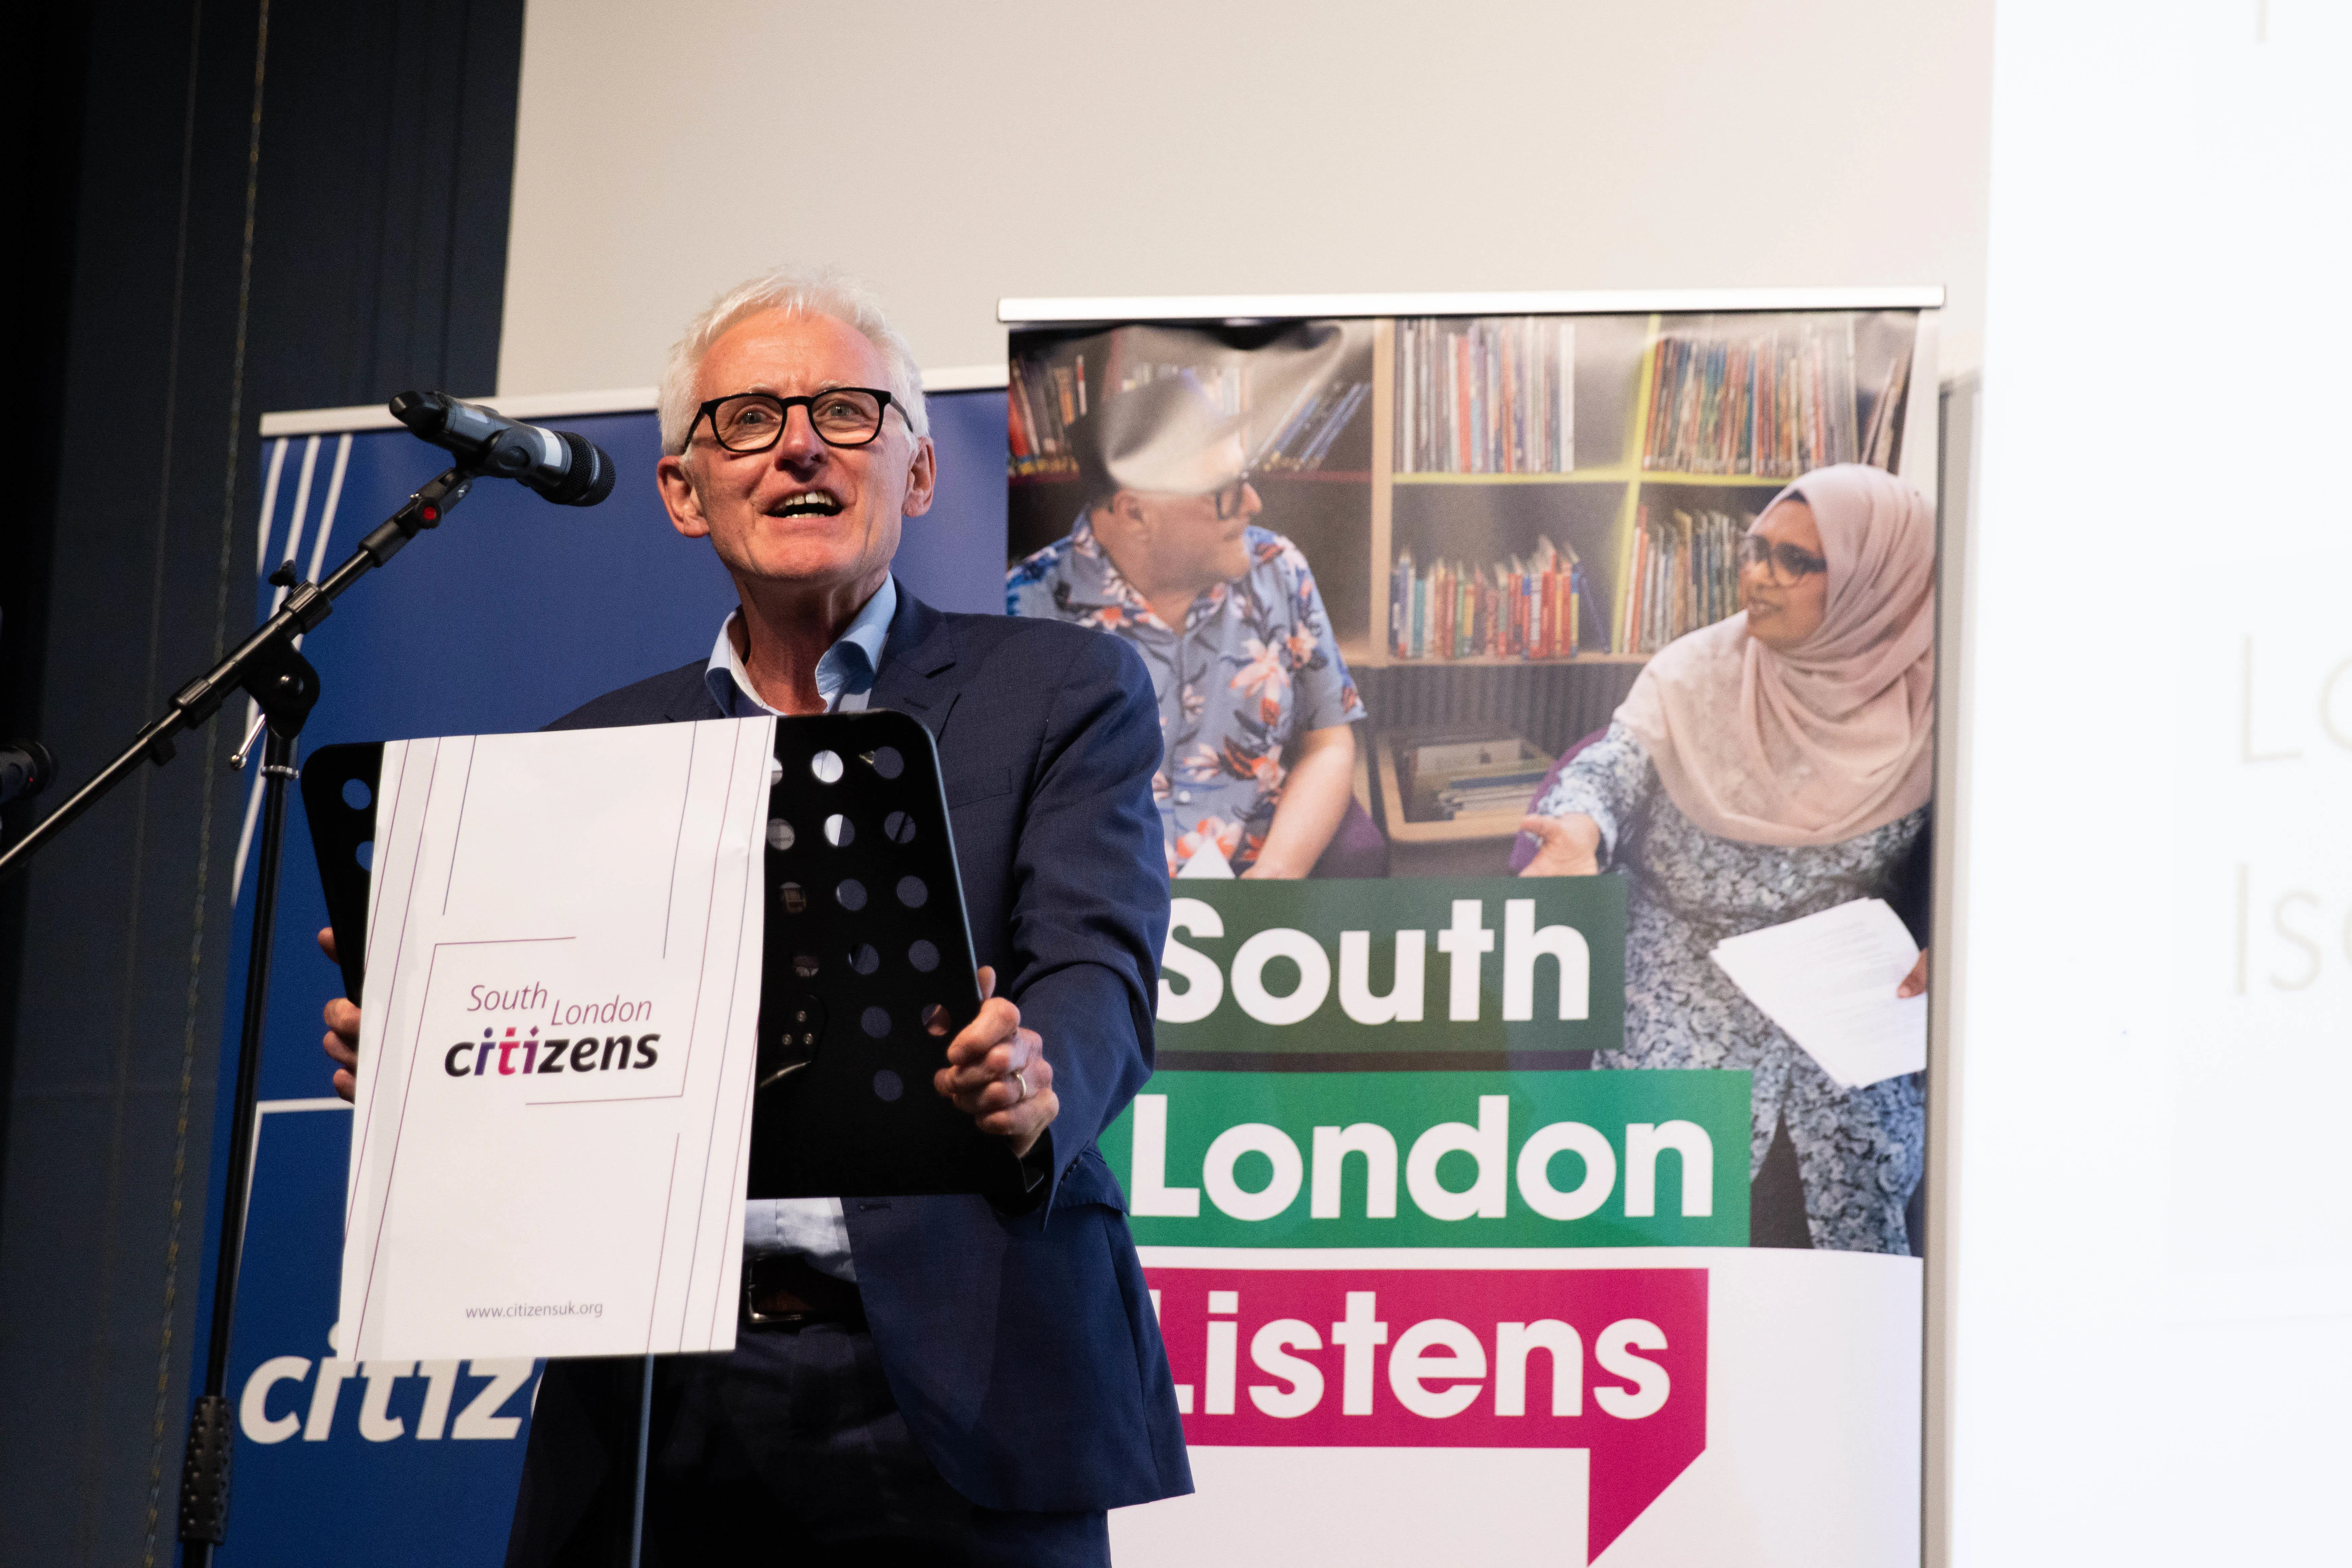 Photo of Sir Norman Lamb. Image credit to Sylvie Pope and Citizens UK.